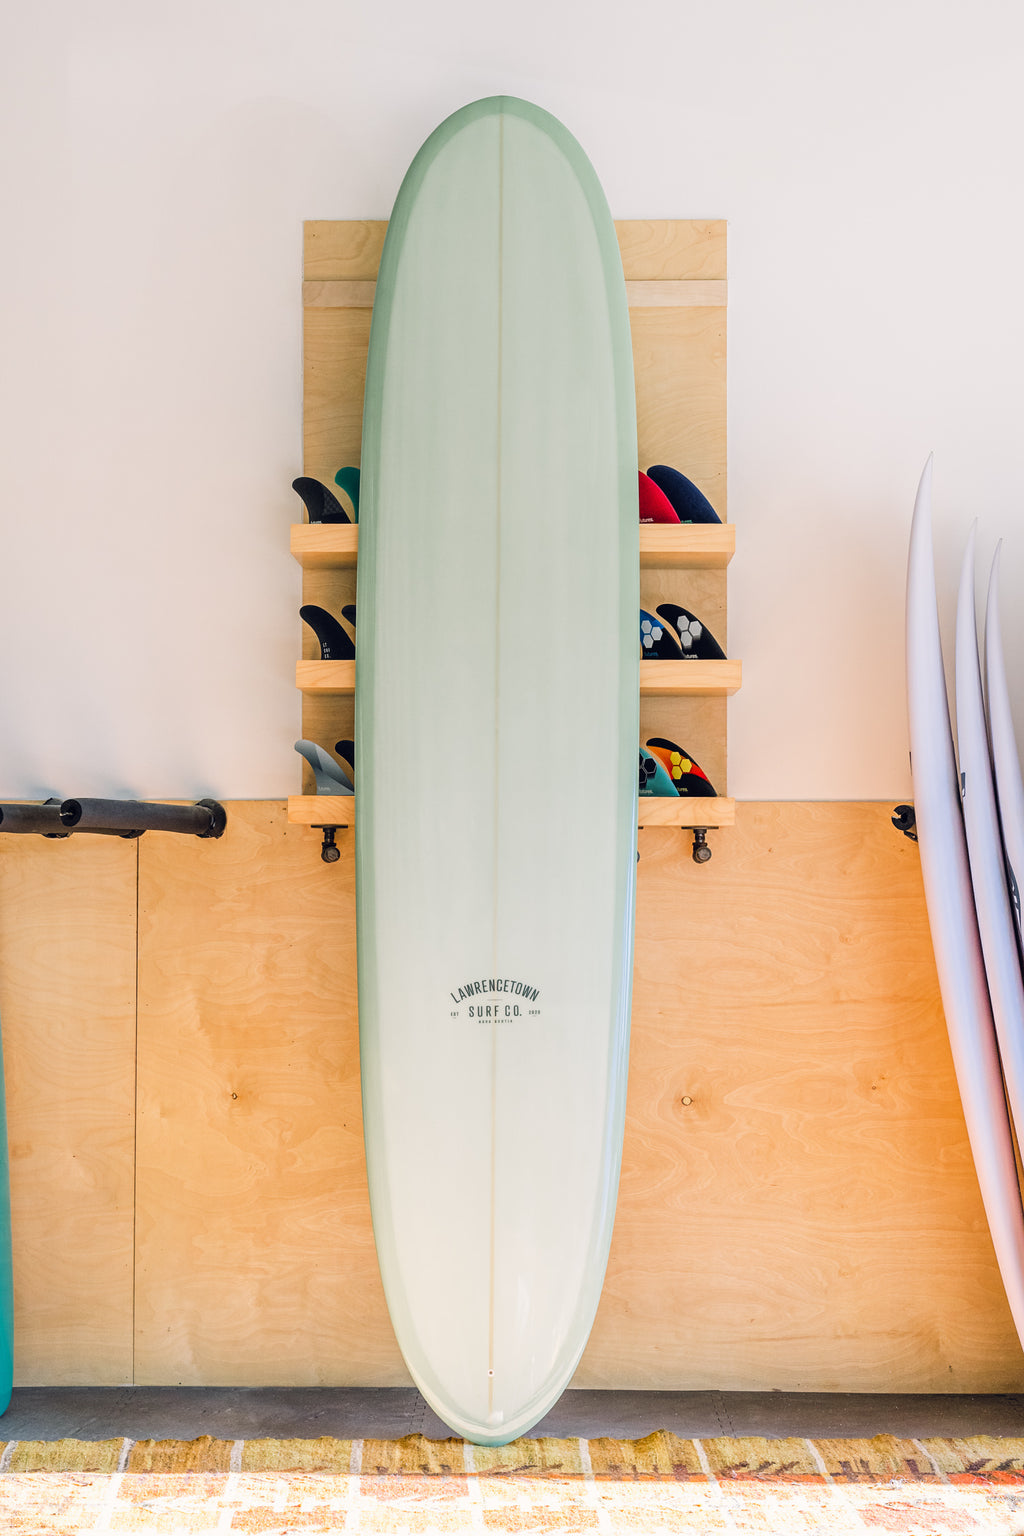 Lawrencetown Surf Co. - 8'8 Round Pin Long board